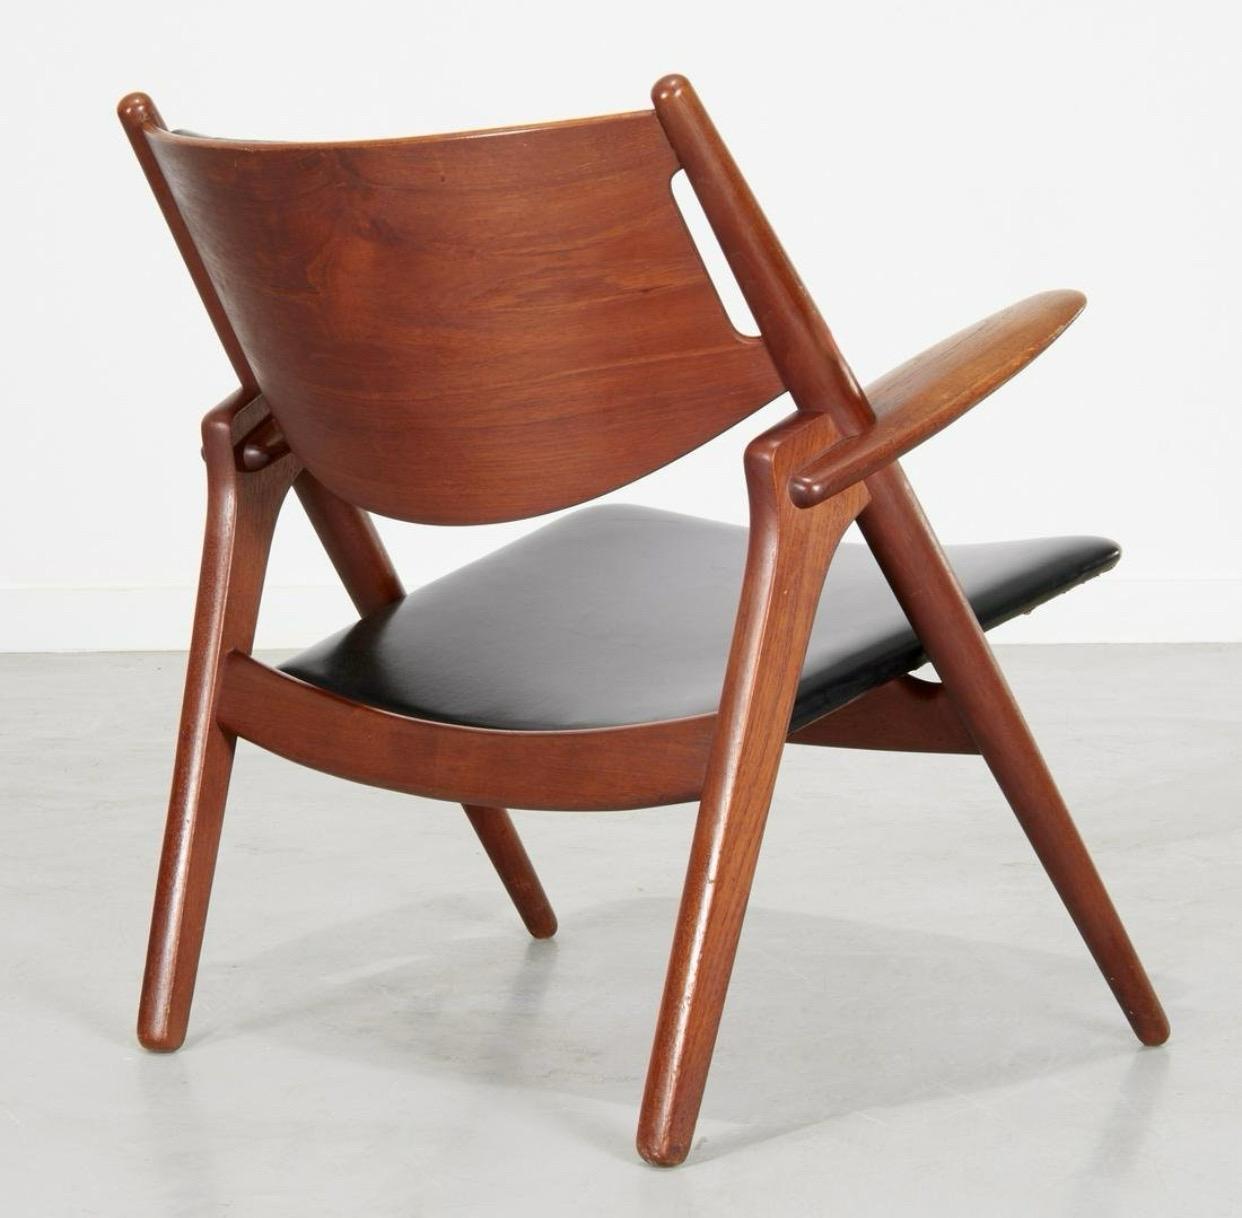 CH28 “Sawbuck” Chair in Teak Wood and Leather by Hans Wegner for Carl Hansen In Good Condition For Sale In Chicago, IL